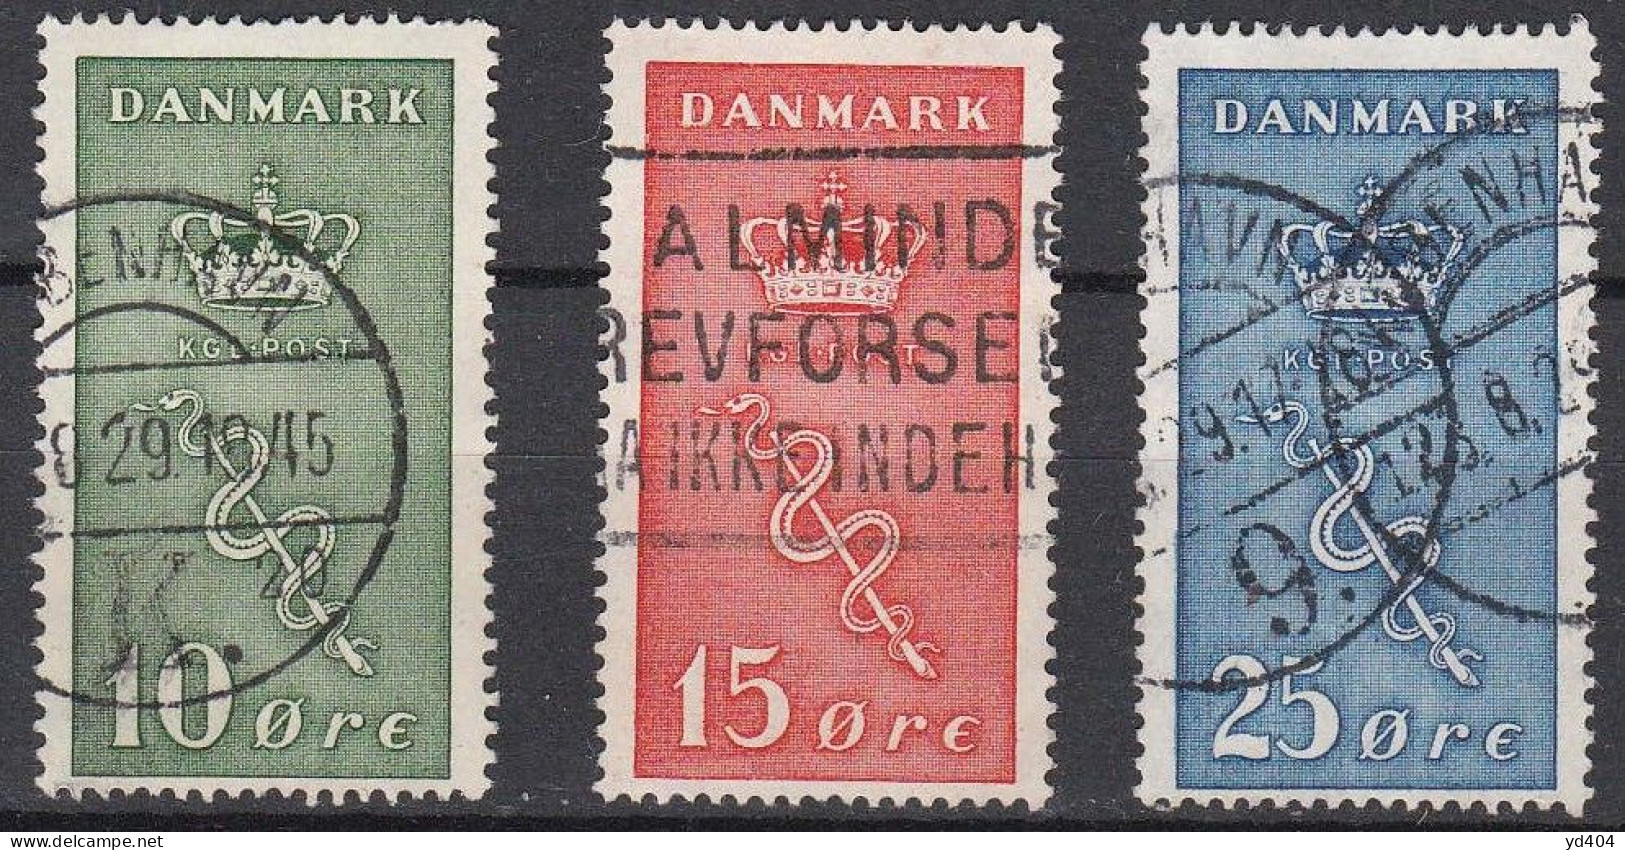 DK035B – DENMARK – 1929 – CANCER RESEARCH FUND – SG # 252/4 USED 98 € - Used Stamps